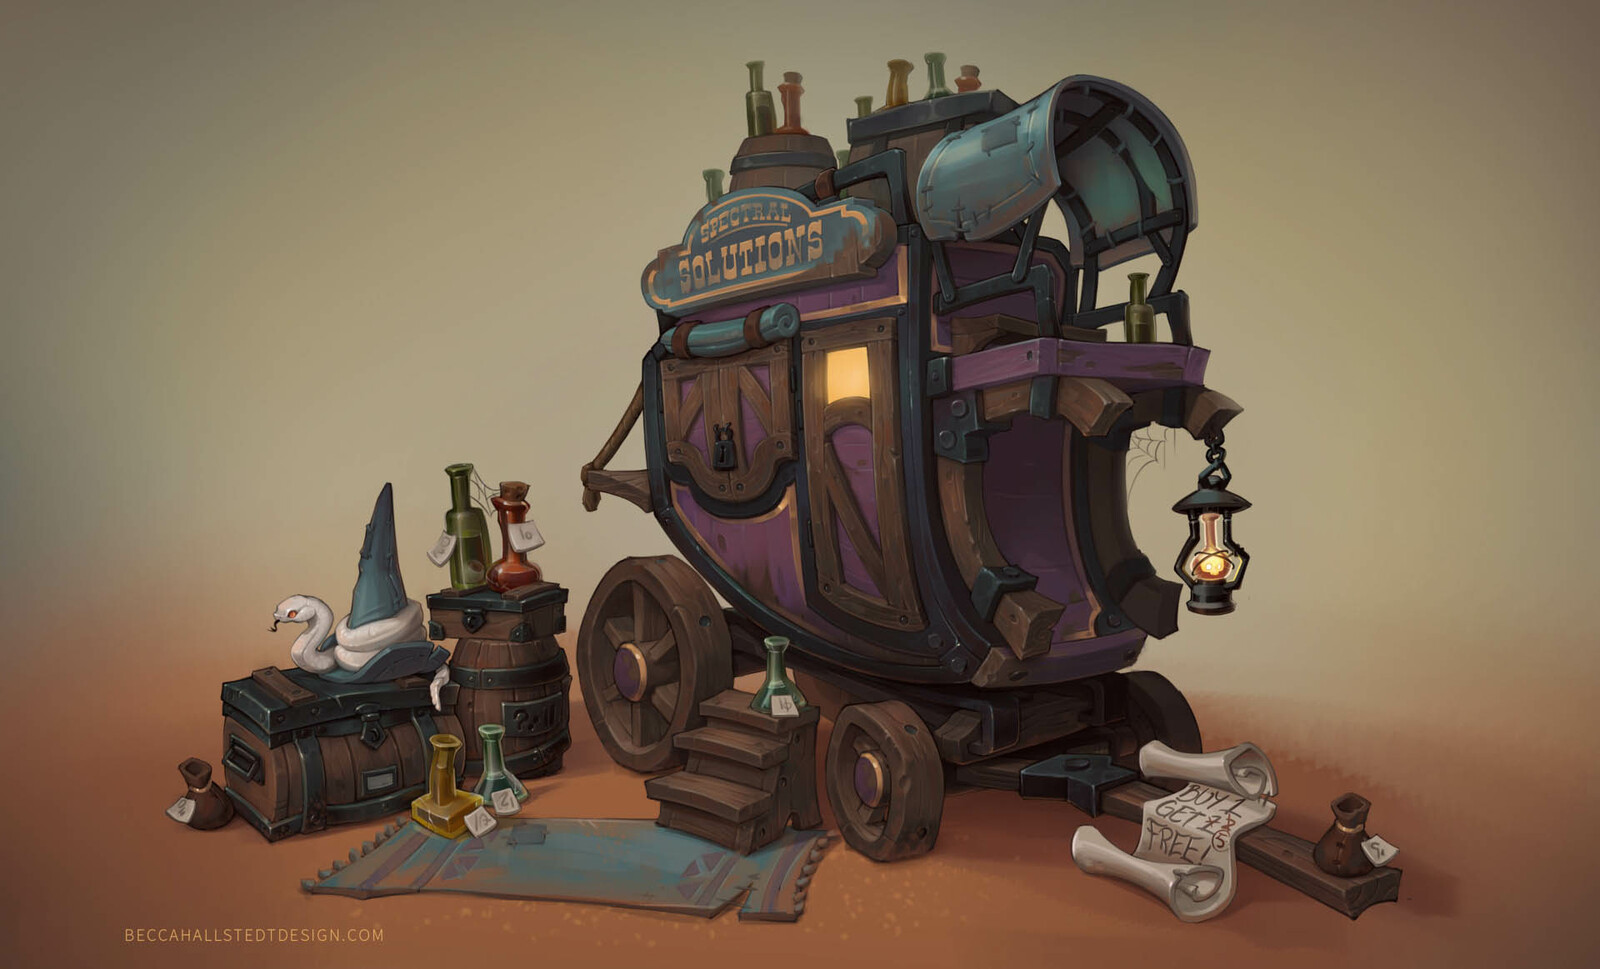 Concept Art by Becca Hallstedt